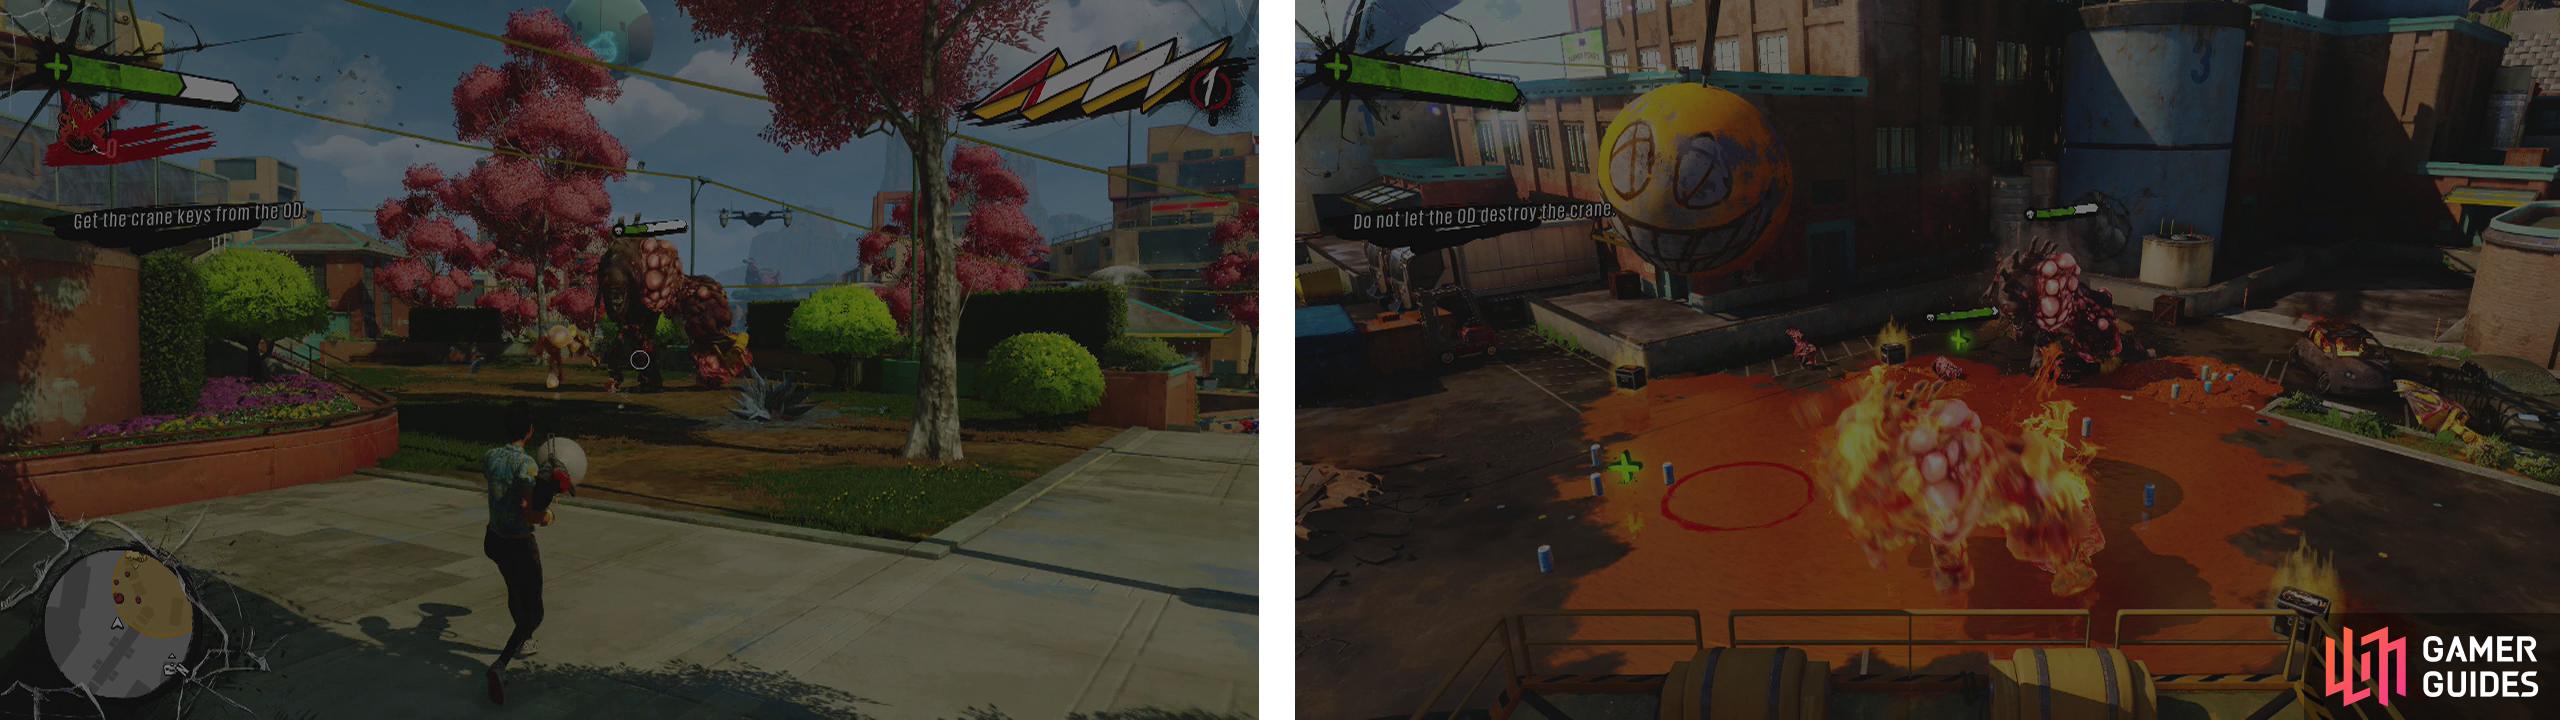 Head to the park nearby and kill the OD, the Herker has the crane key (left). Use the crane to smush all of the OD that enter the area (right).